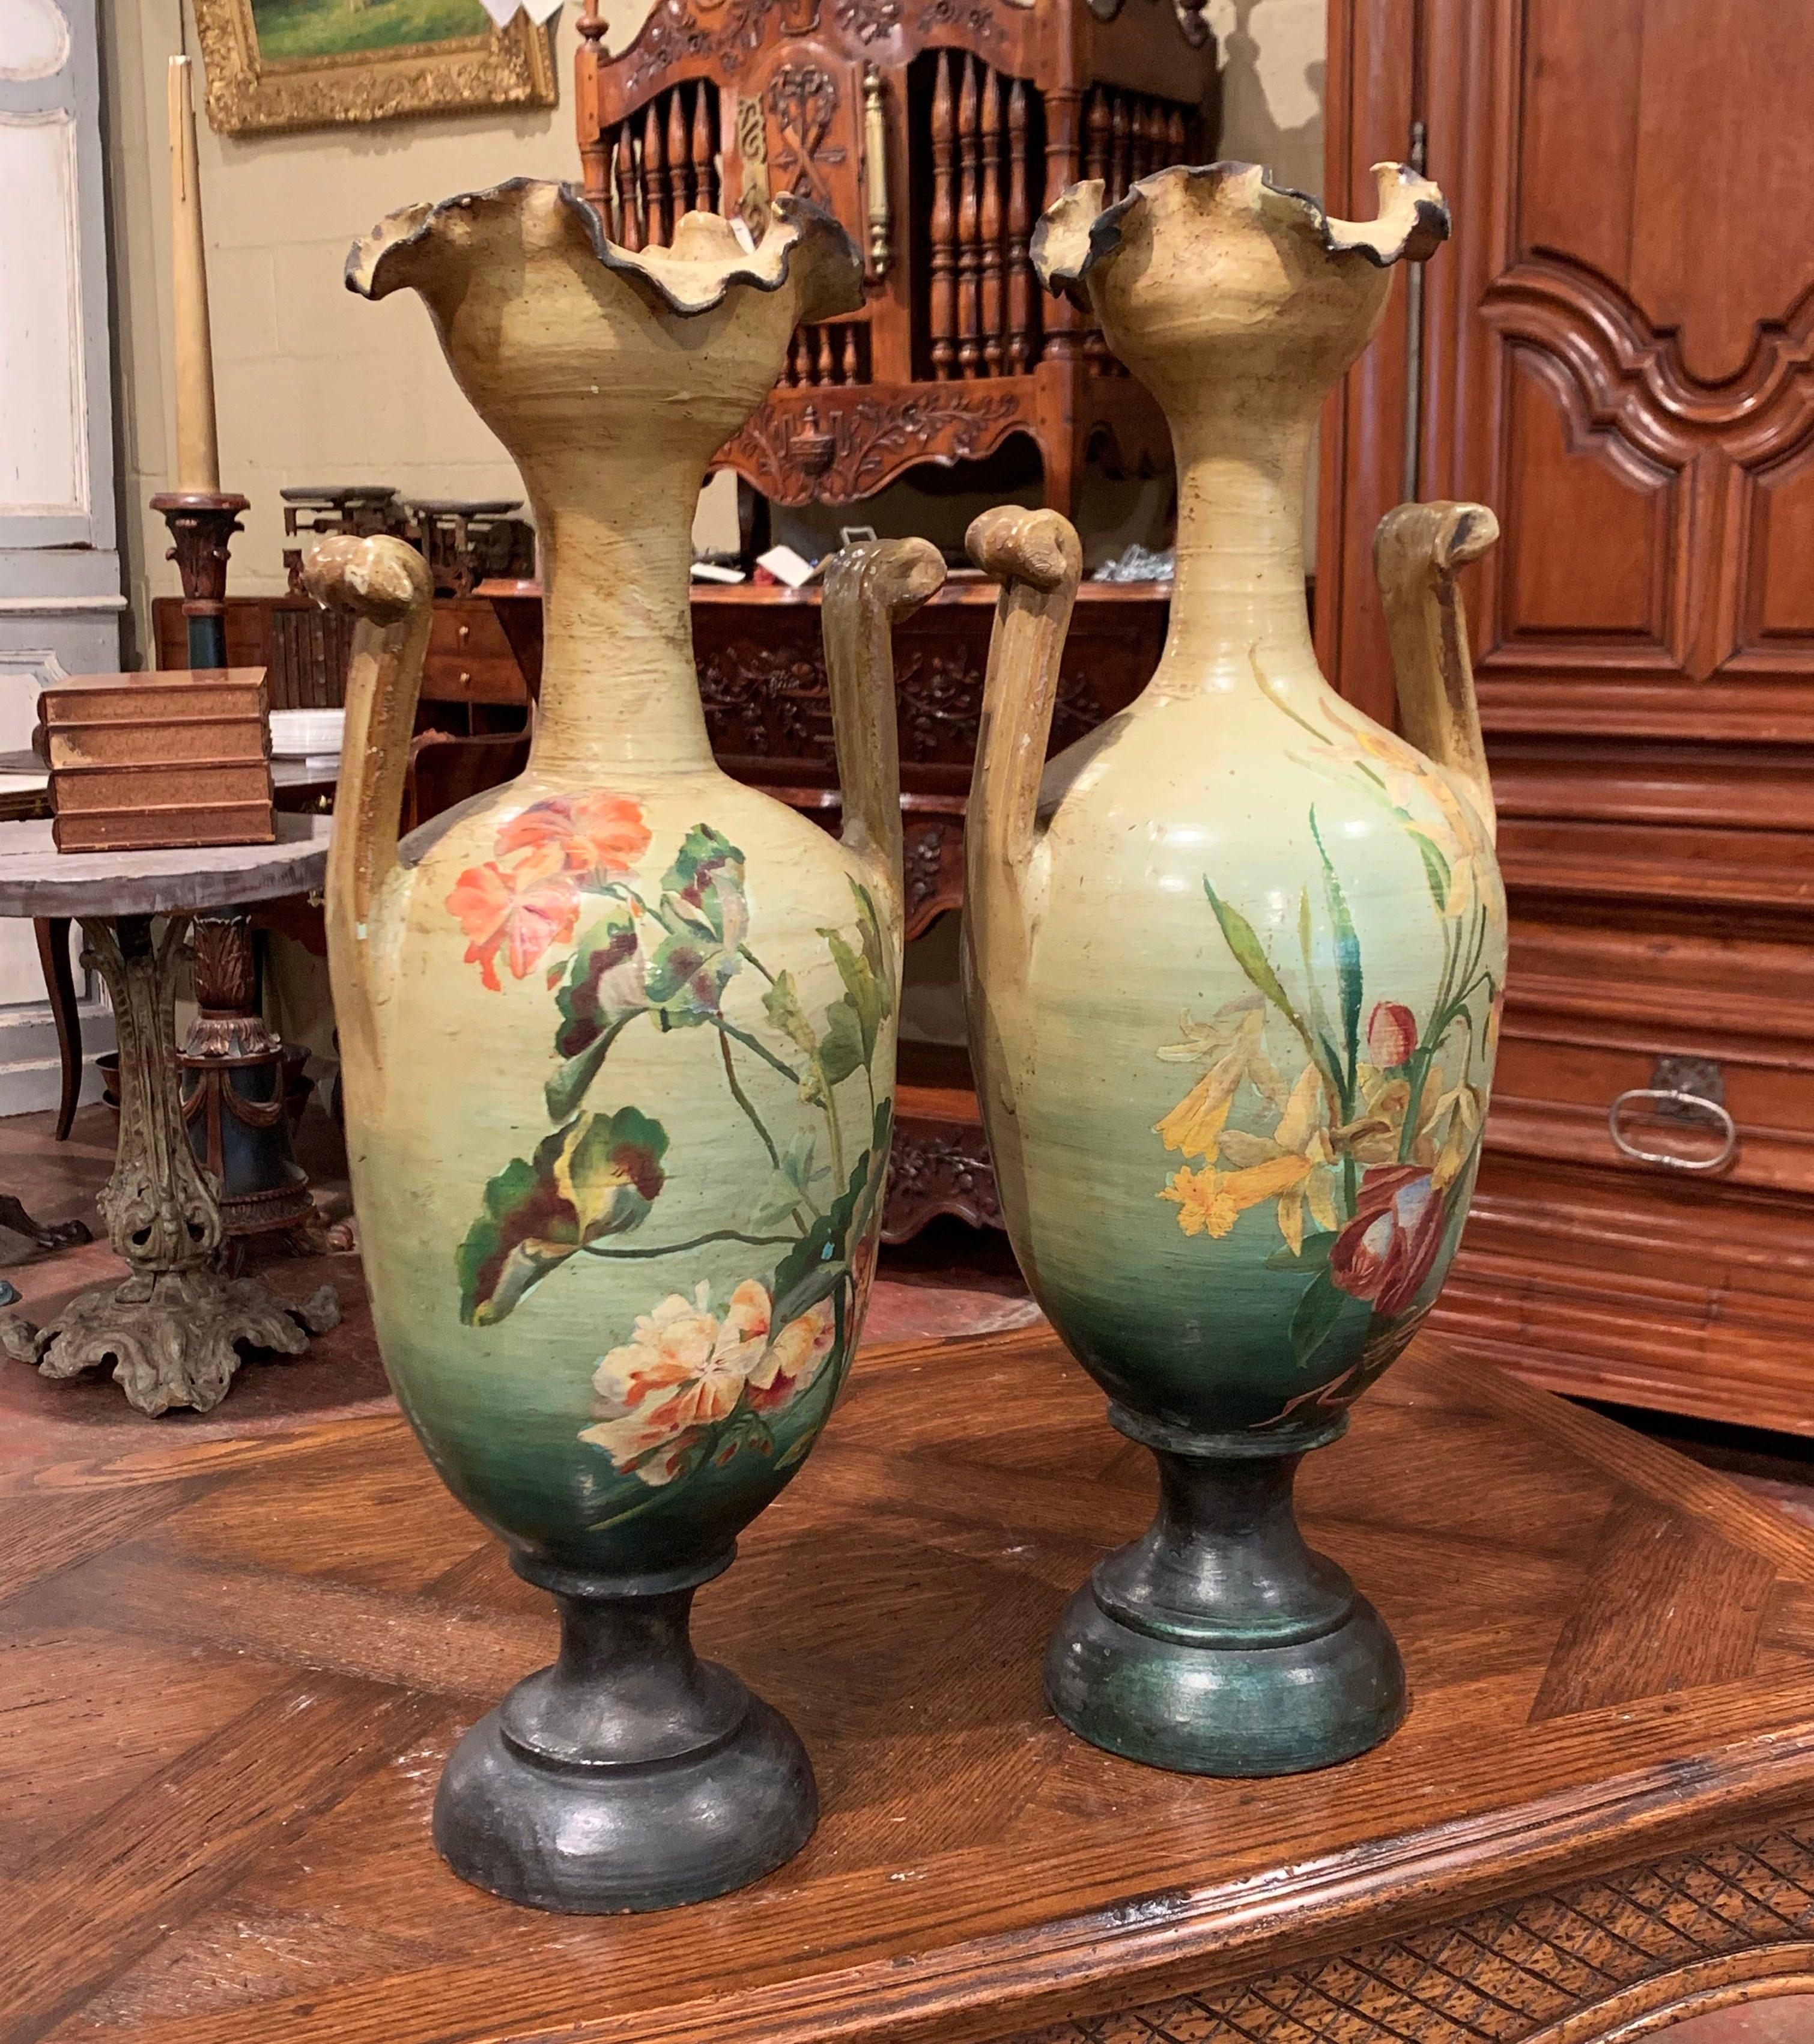 Sculpted from terracotta, these large vases were created in southern France circa 1900. Each painted, sculptural vessel sits on a round, dark green base, and feature handles on both side. Each vase has tall neck, wide mouth and an artful,